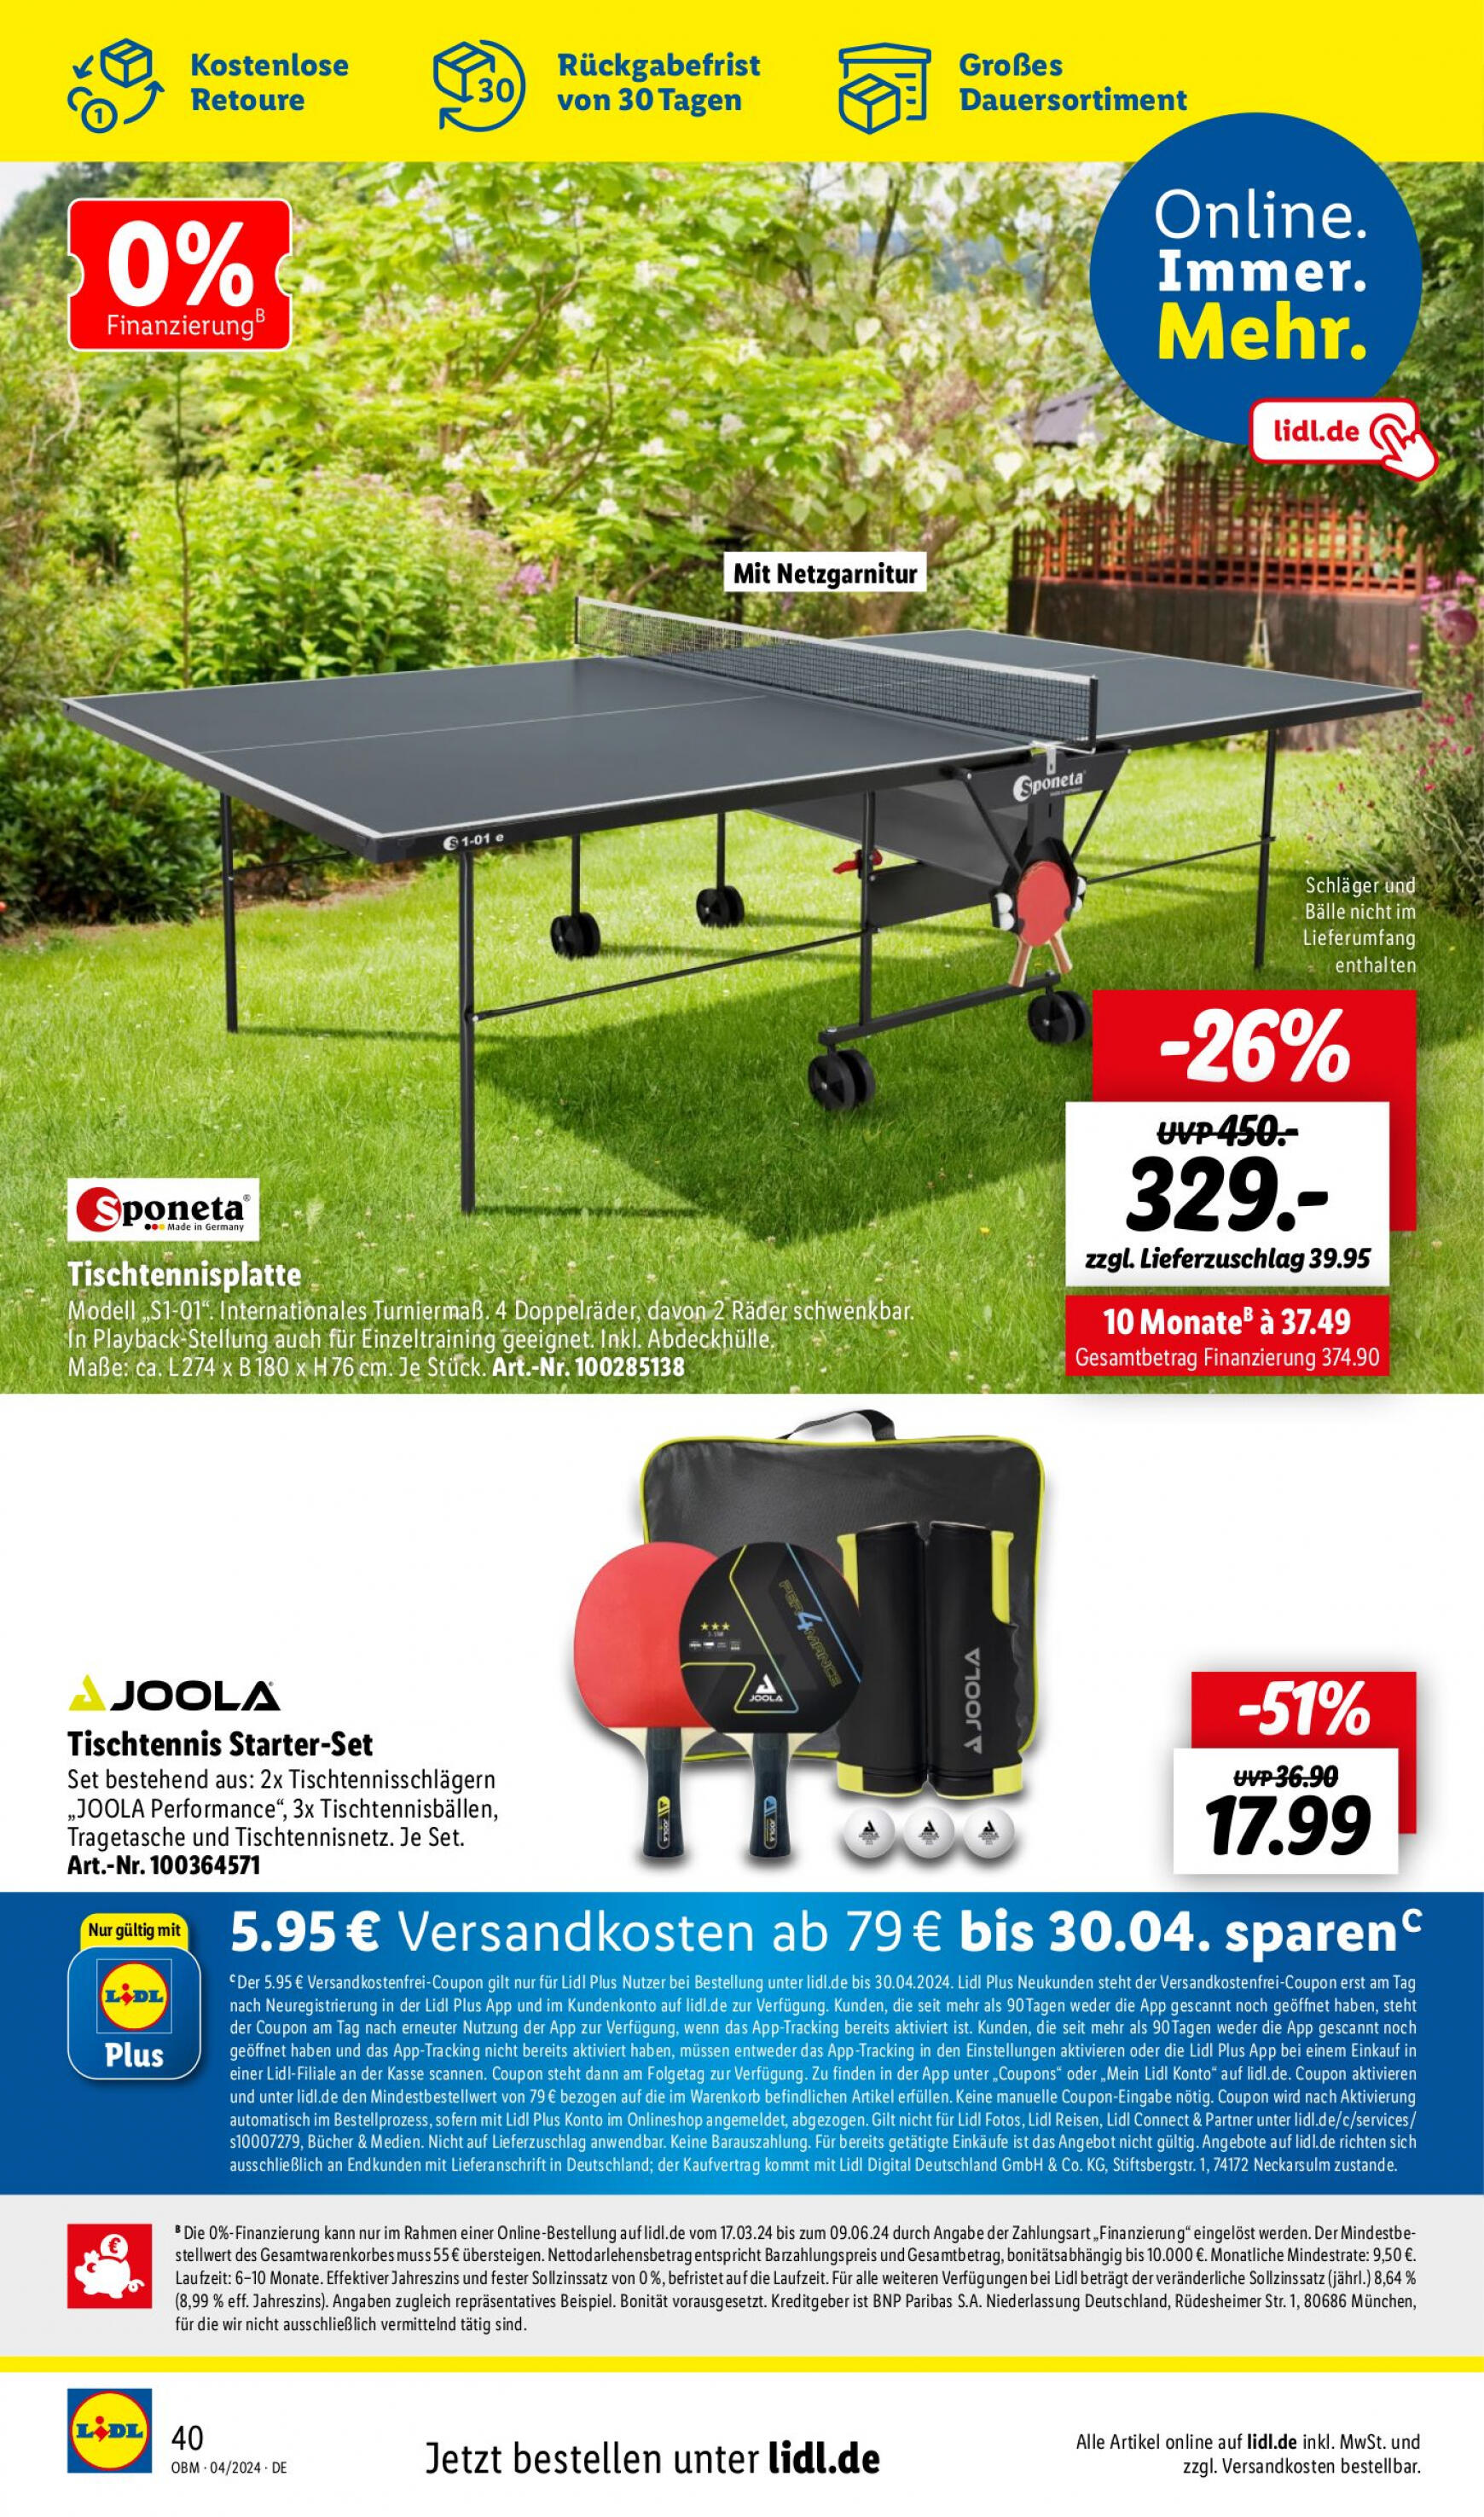 lidl - Flyer Lidl - Aktuelle Onlineshop-Highlights aktuell 01.04. - 30.04. - page: 40